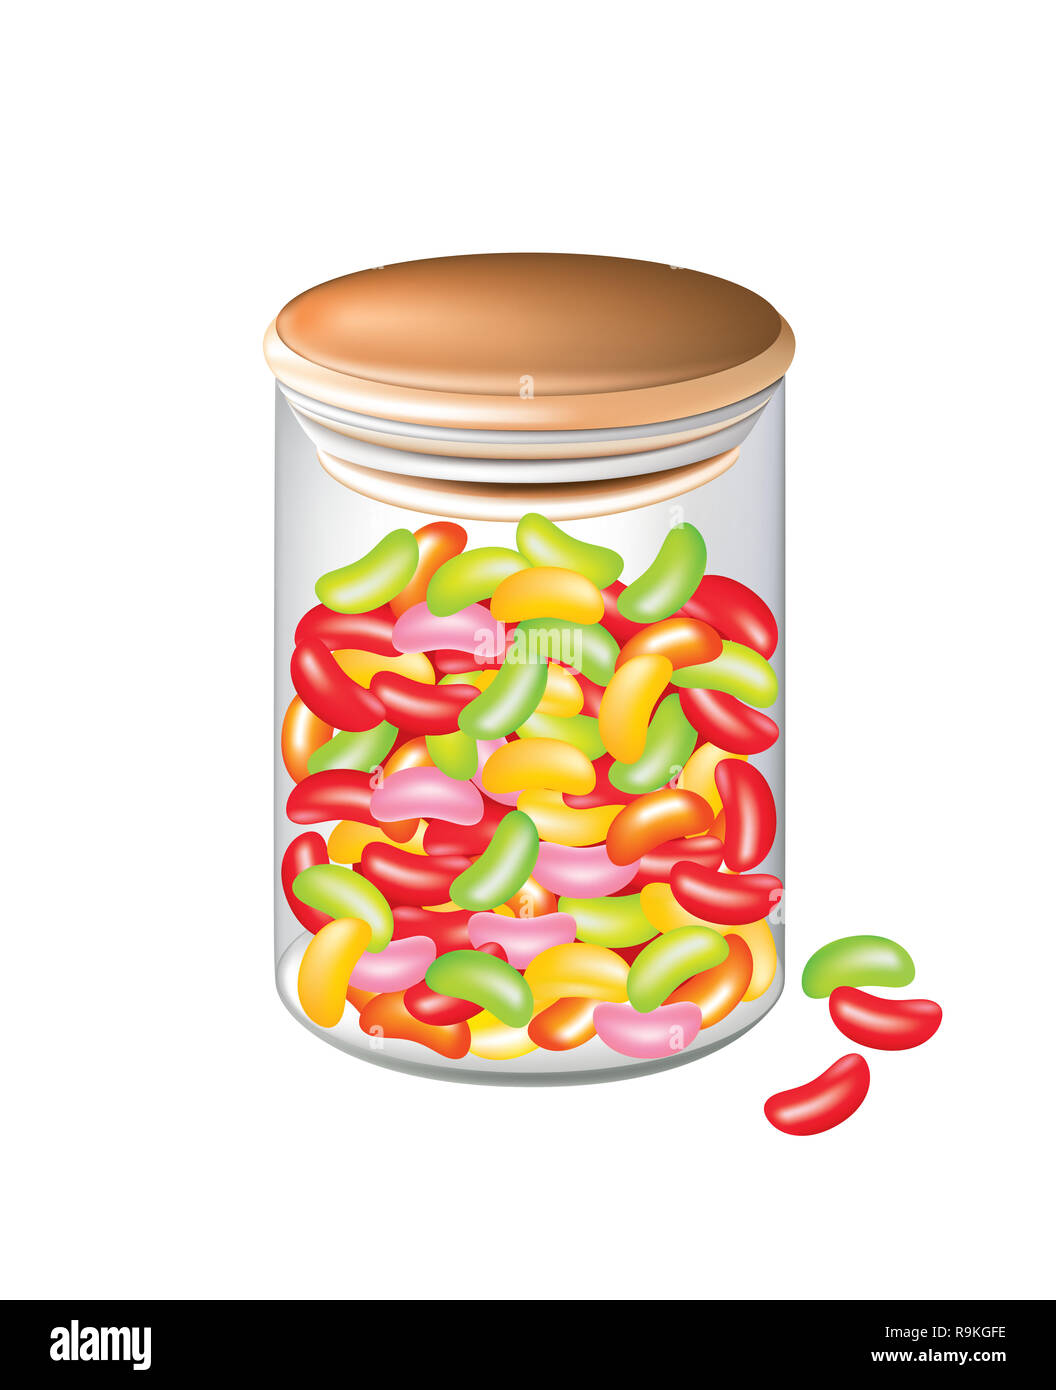 colorful jellybeans in an airtight glass jar isolated Stock Photo